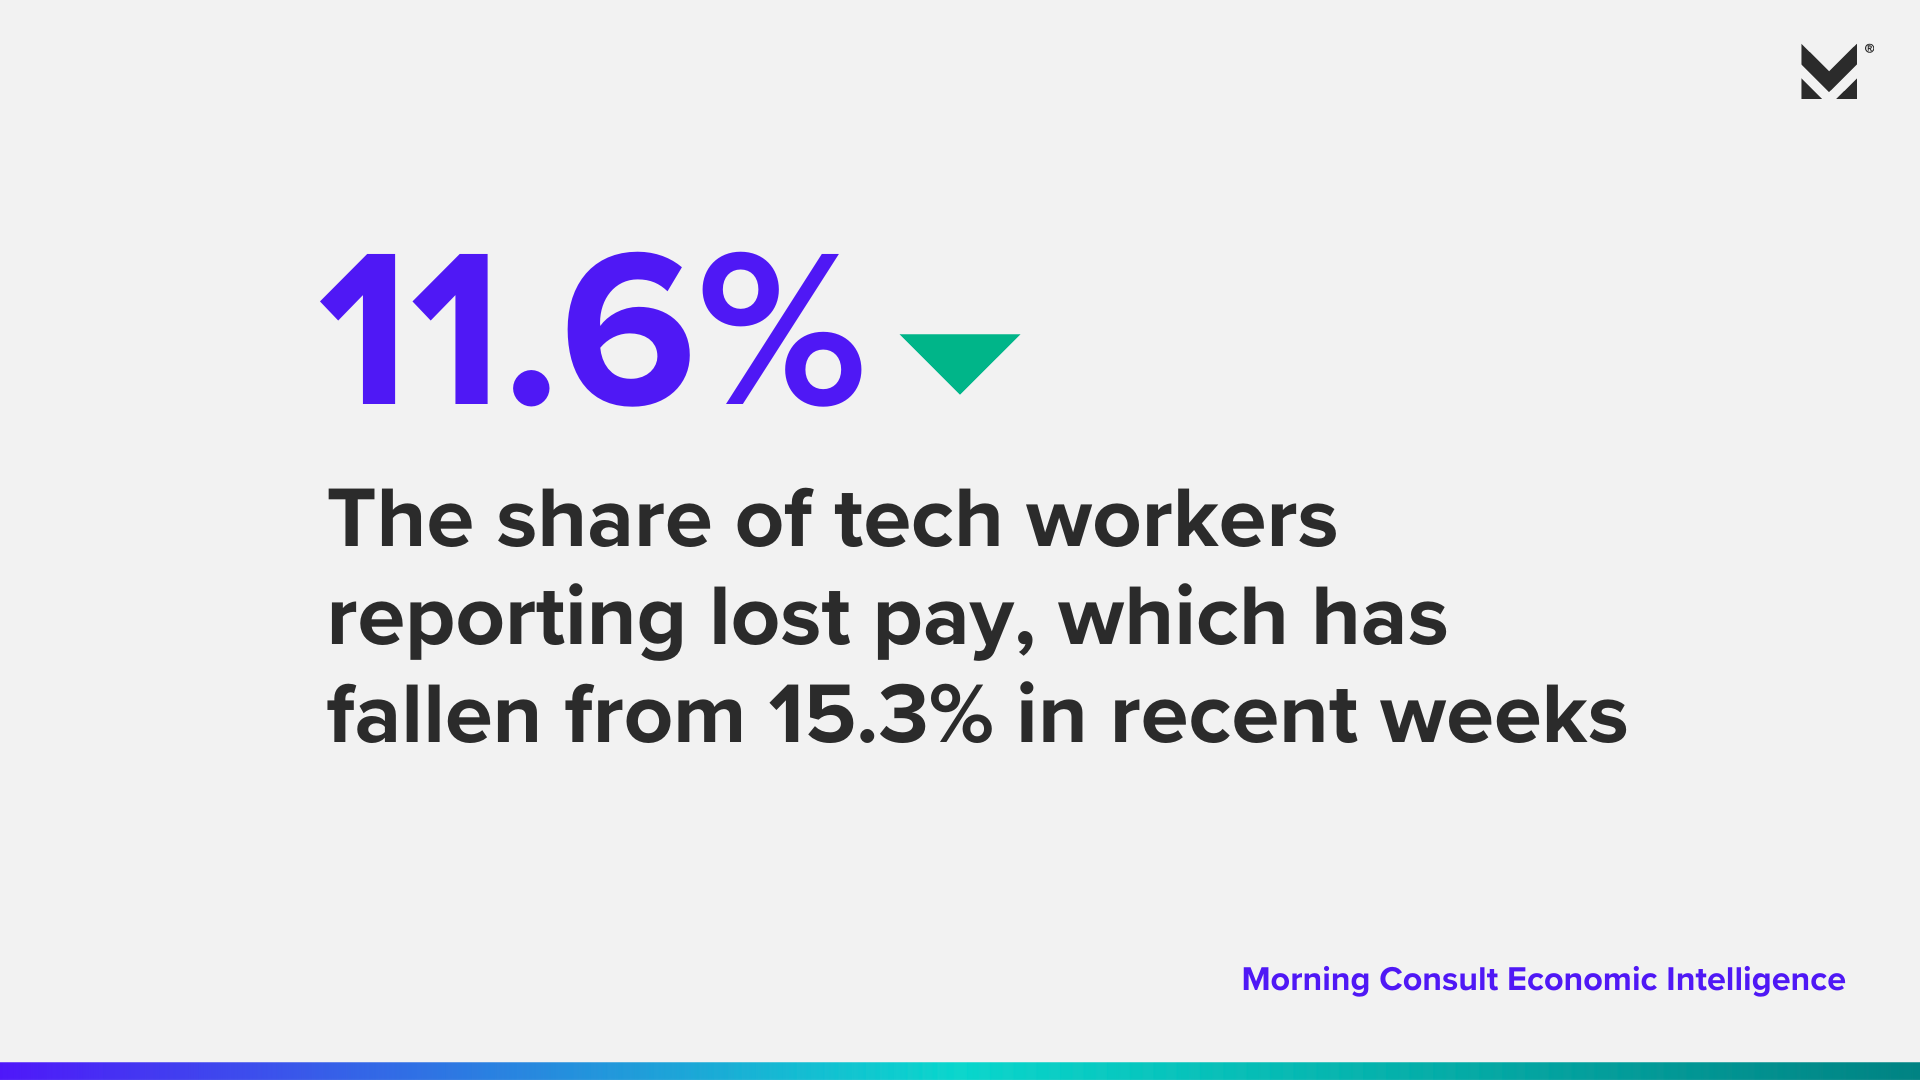 The share of tech workers reporting lost pay, which has fallen from 15.3% in recent weeks.